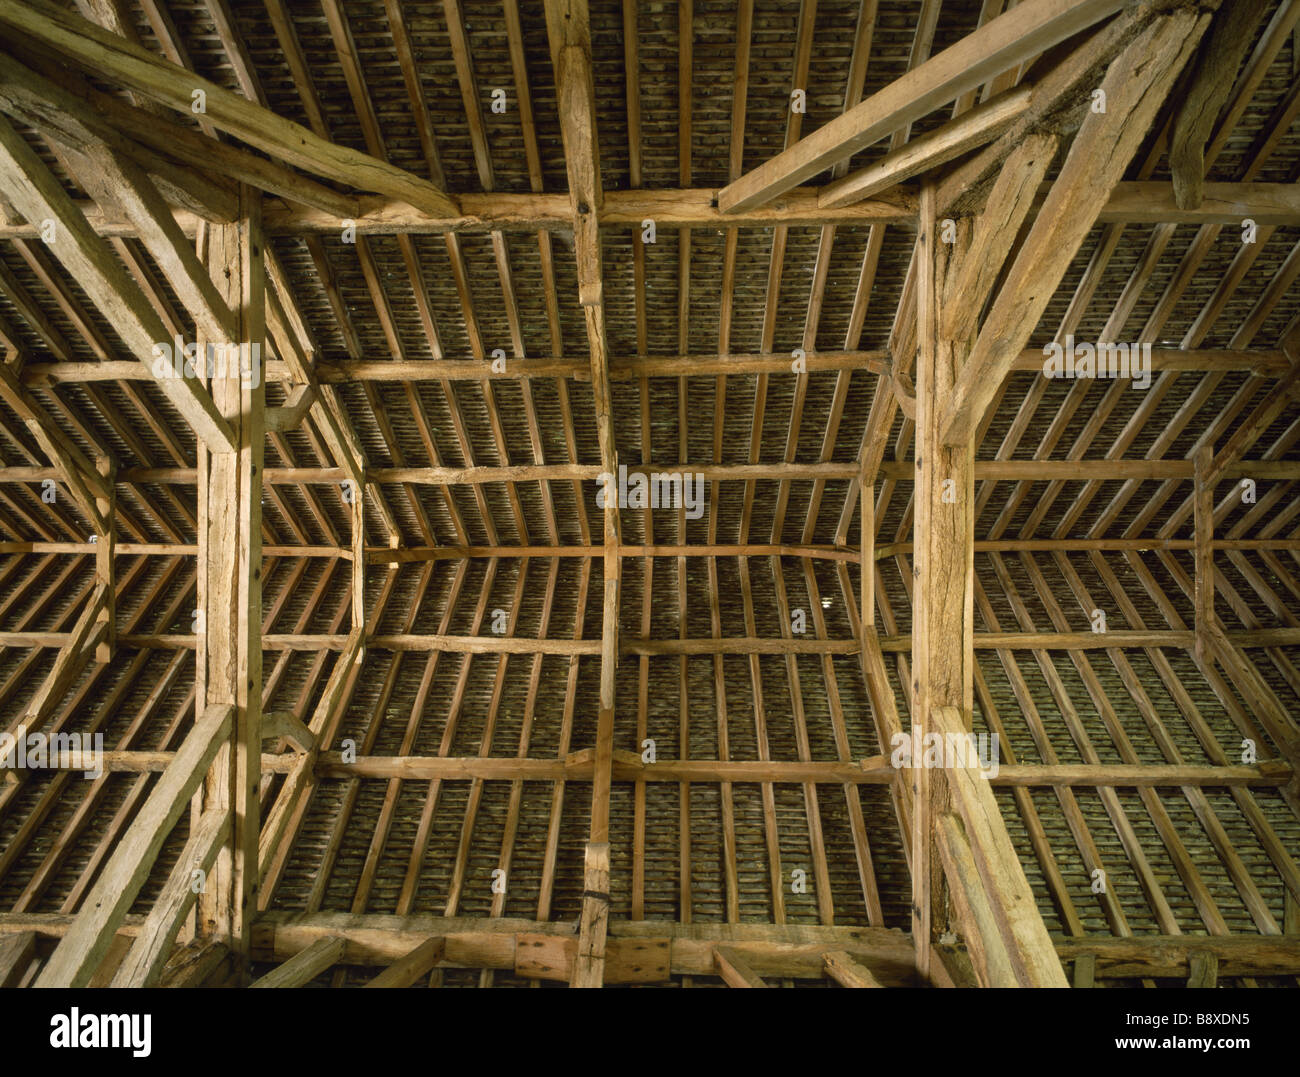 Interior roof stucture of barn looking up Stock Photo